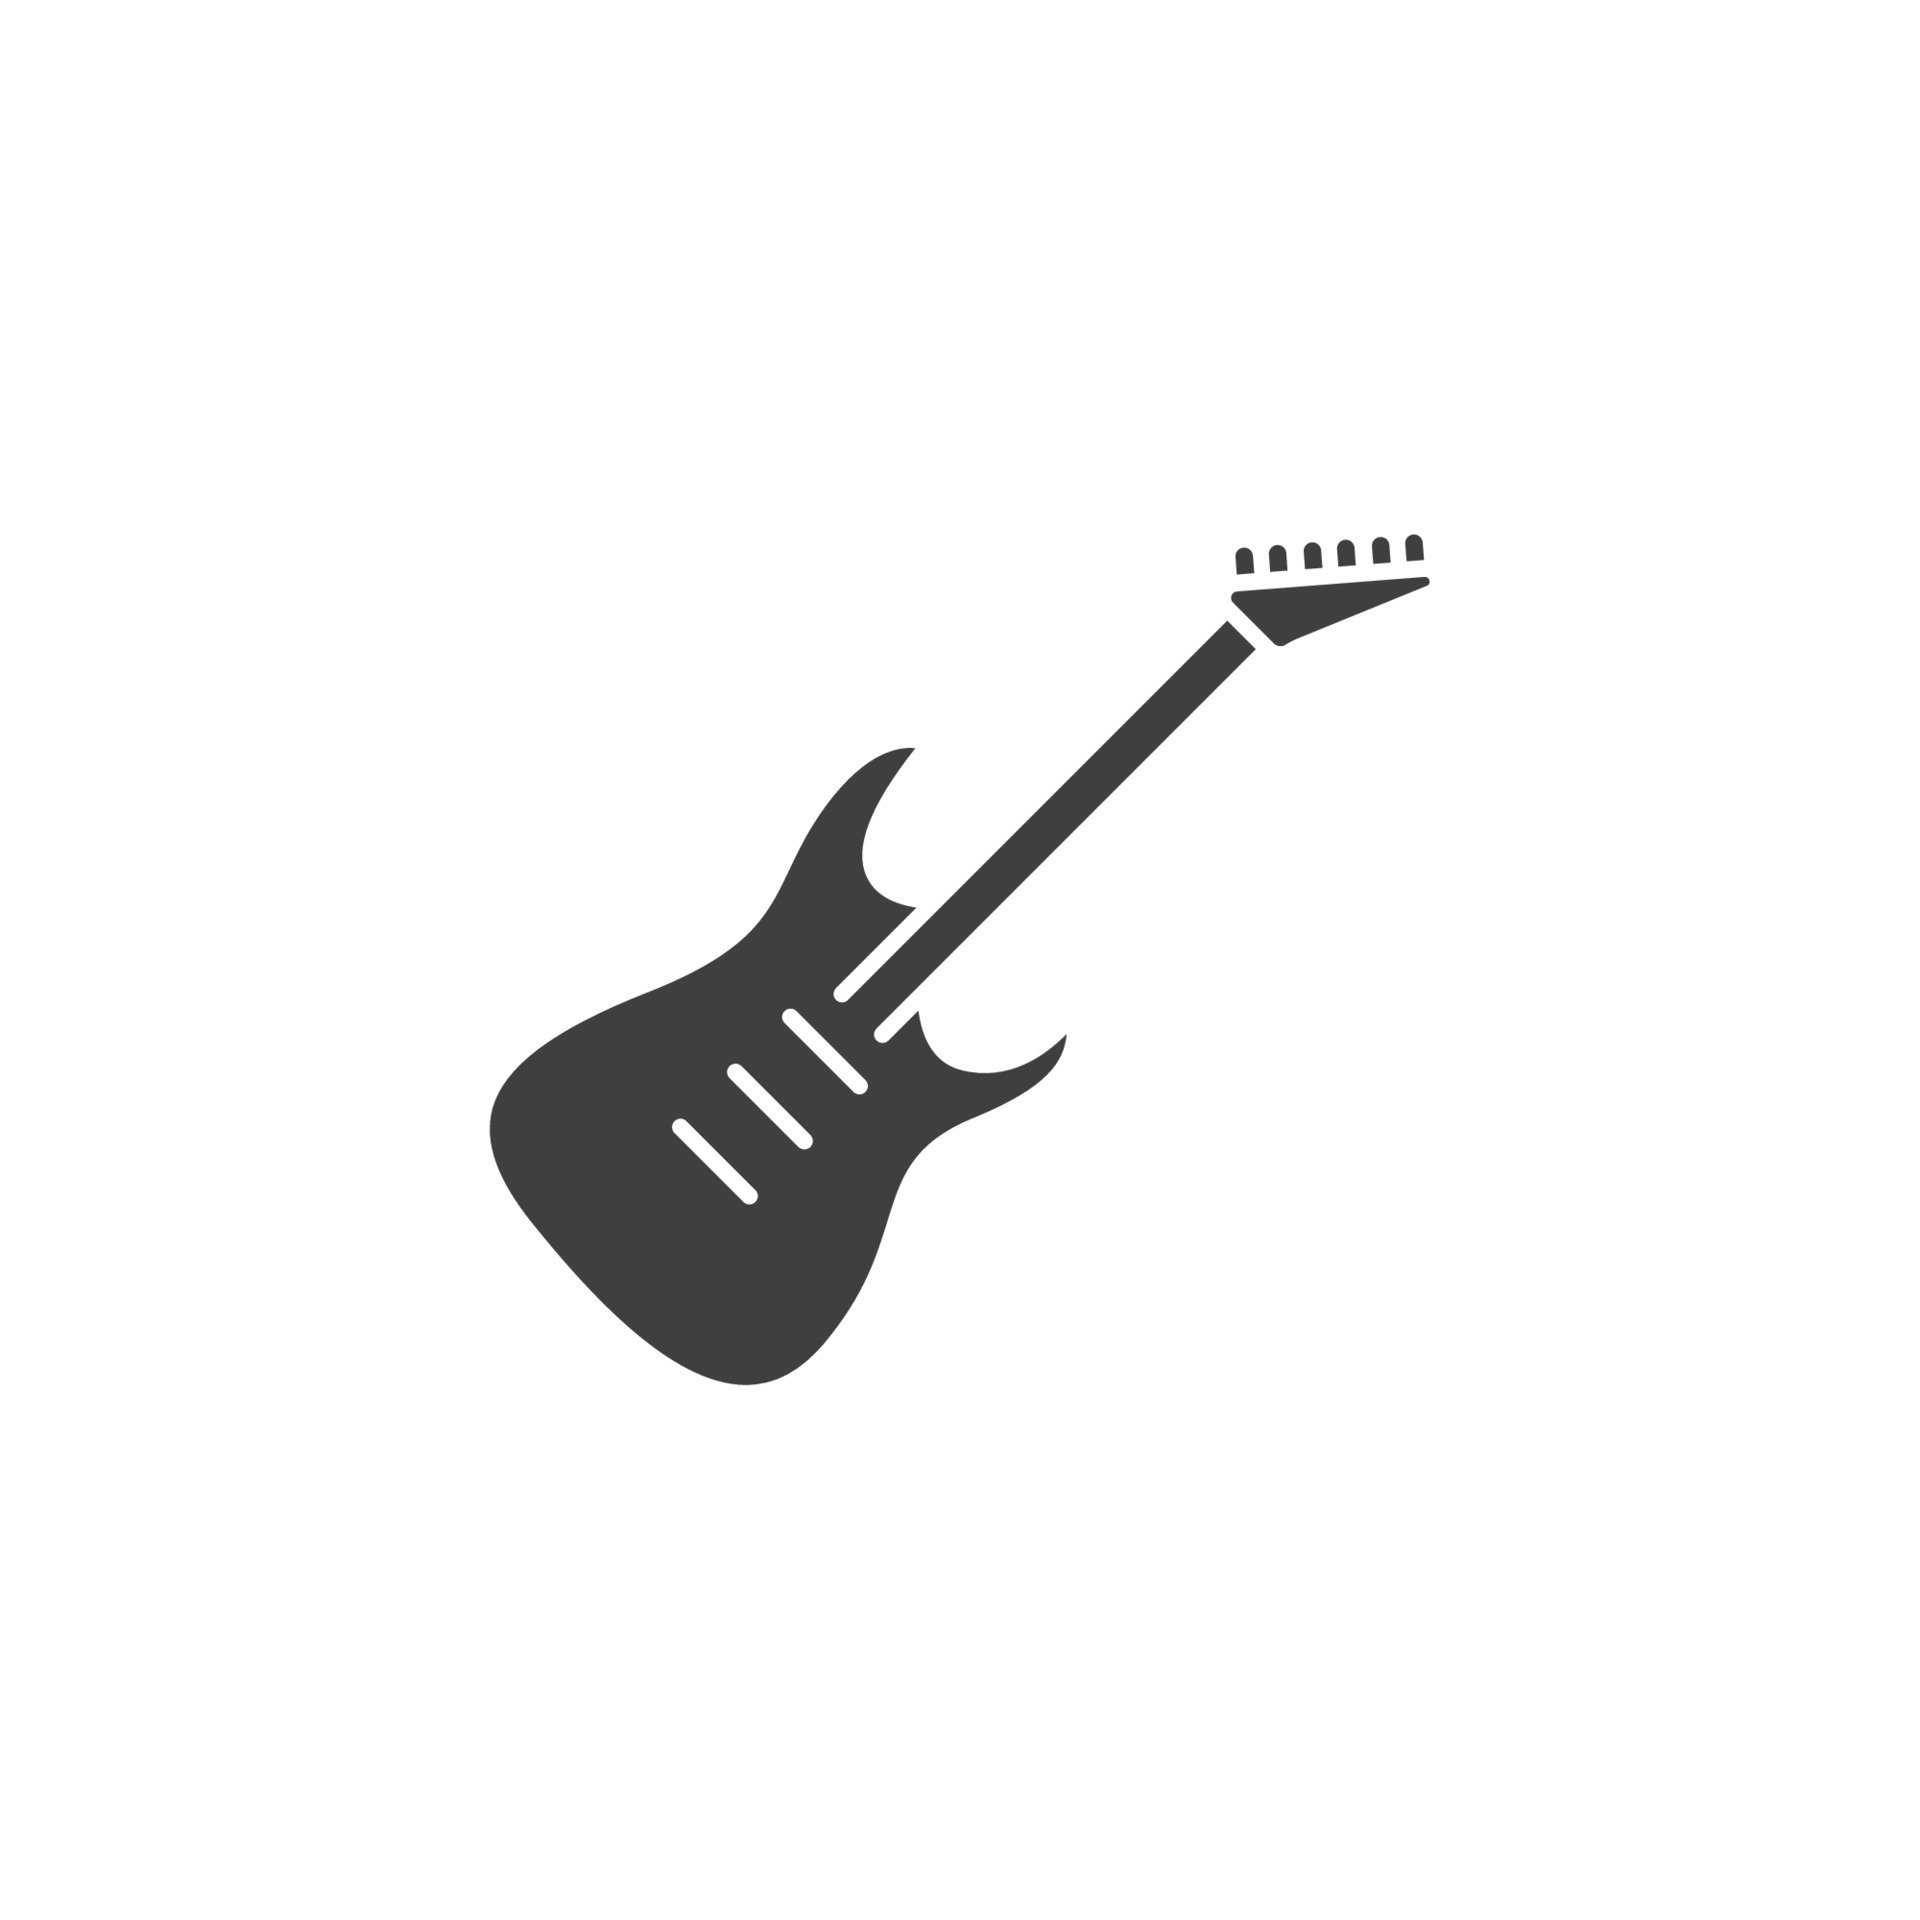 https://static.vecteezy.com/system/resources/previews/009/688/093/original/sign-of-the-guitar-symbol-is-isolated-on-a-white-background-guitar-icon-color-editable-vector.jpg